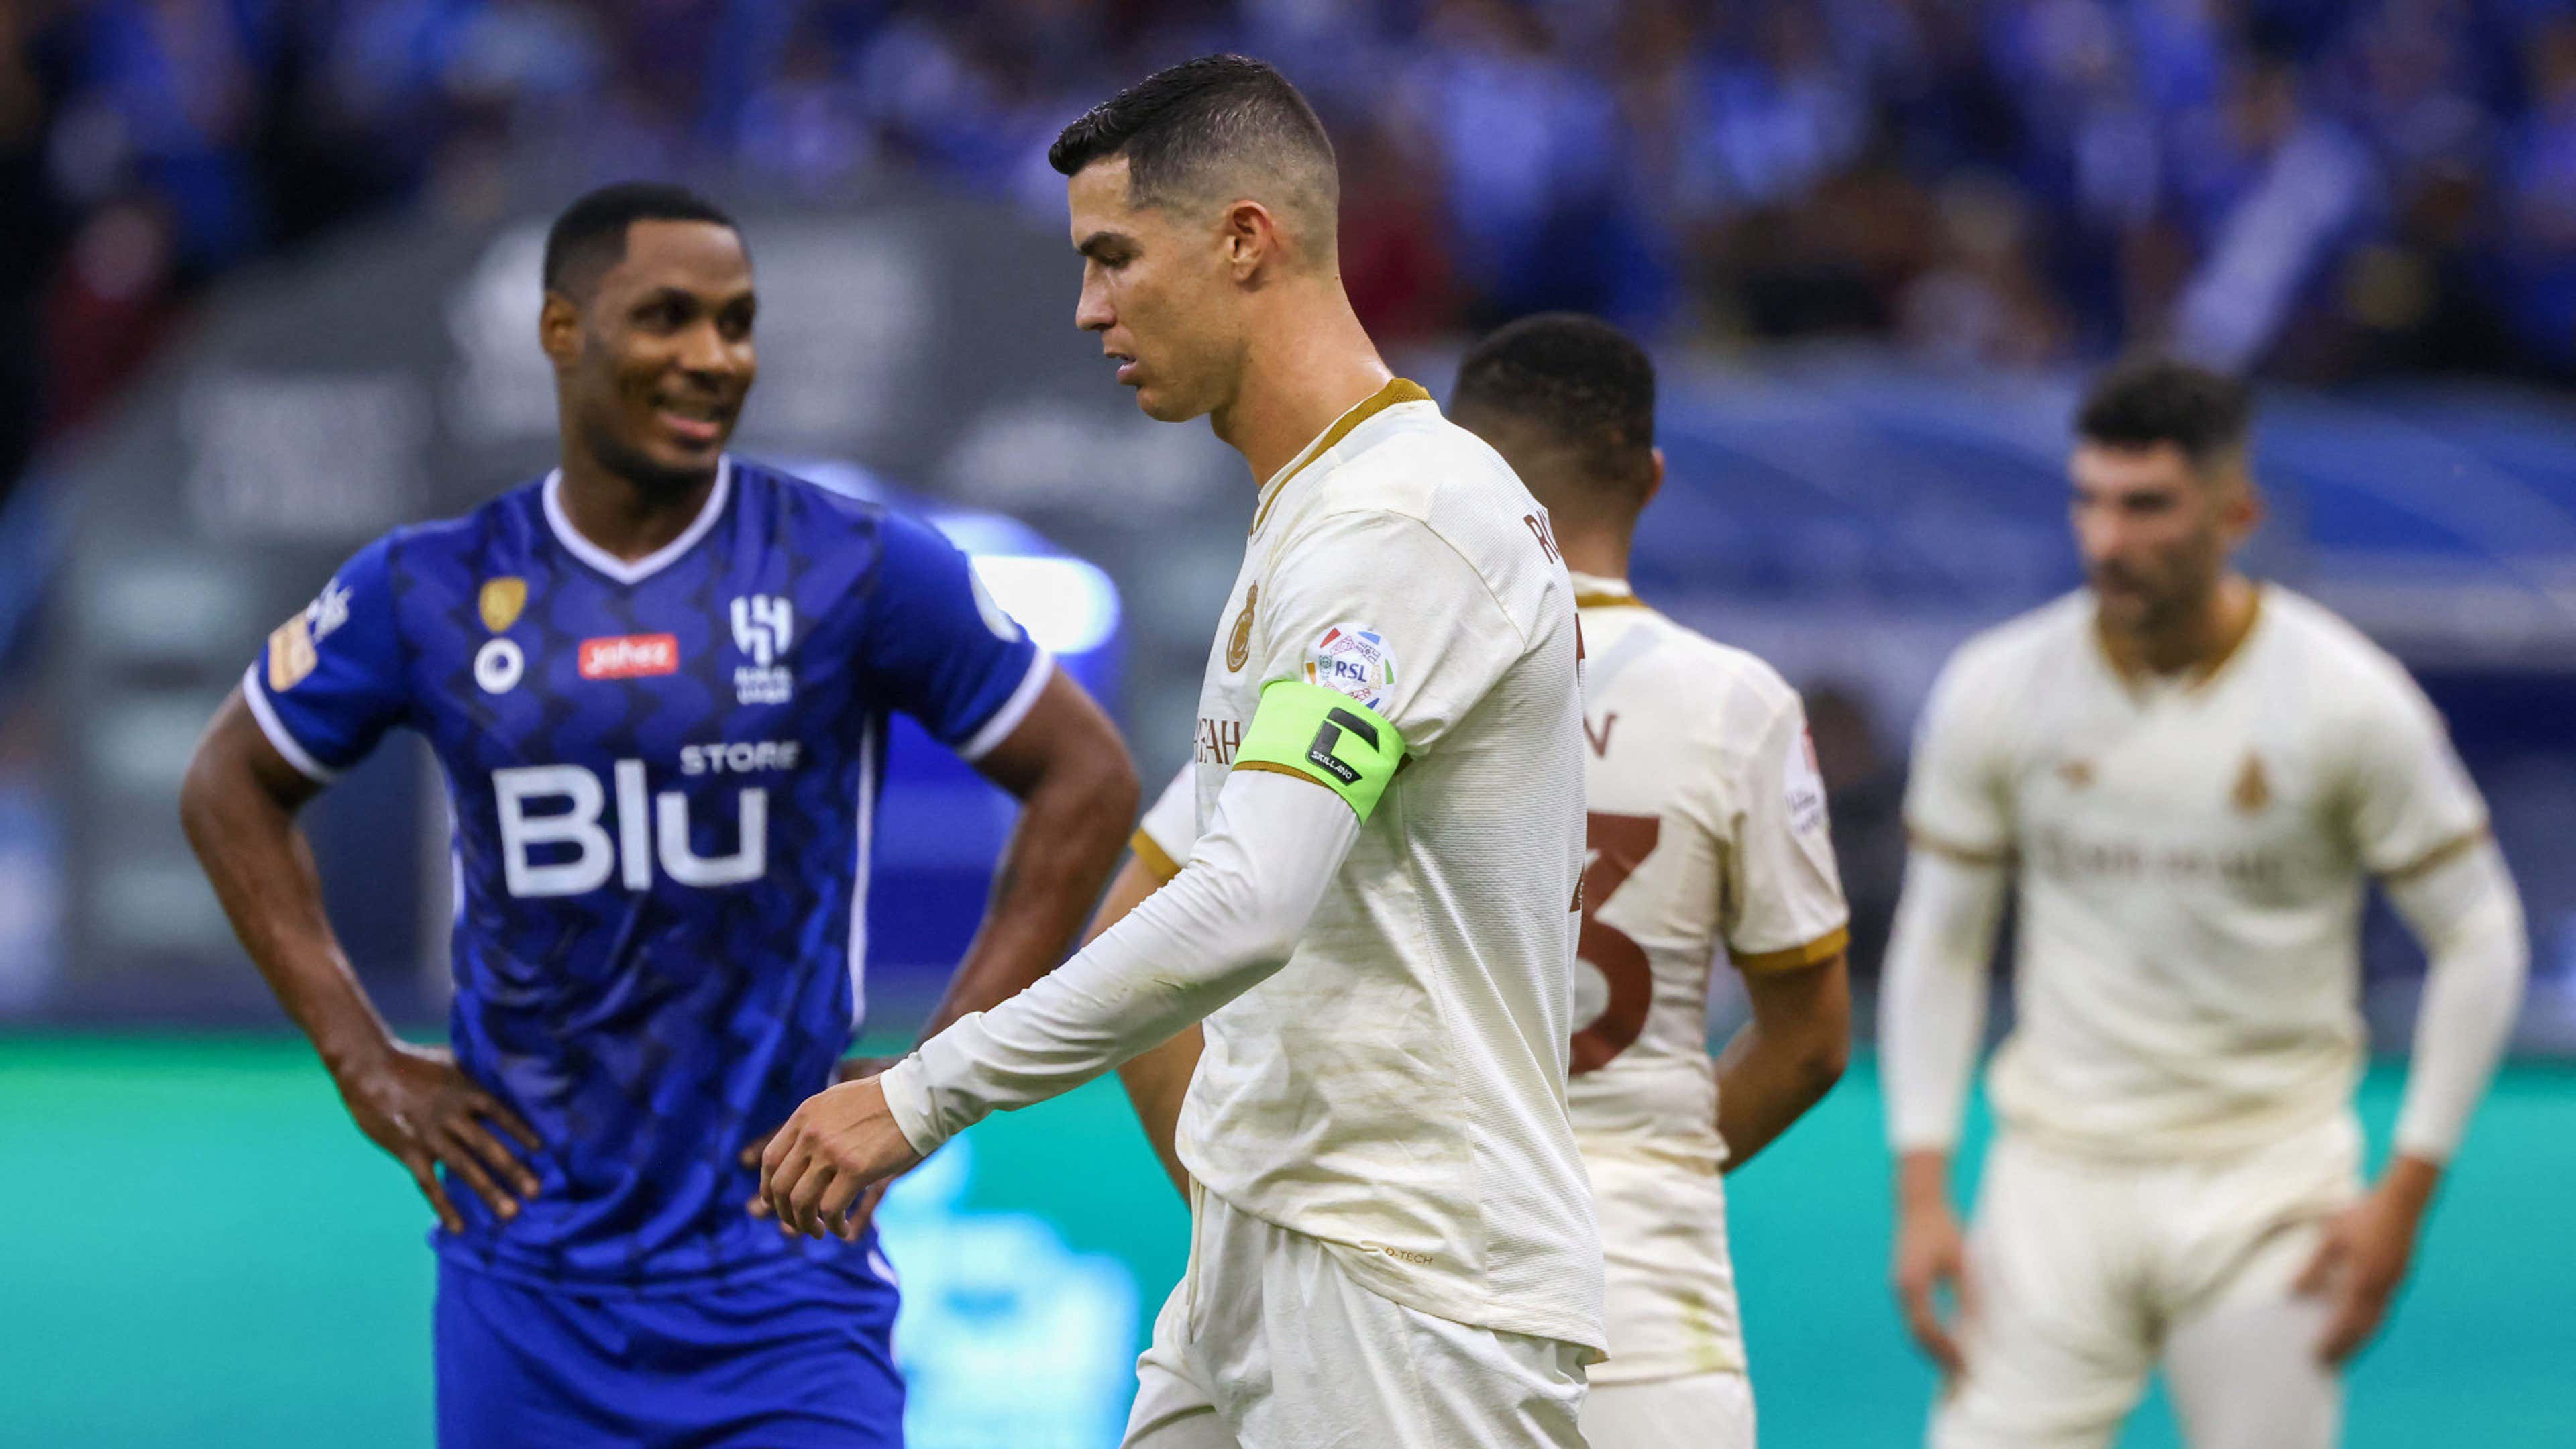 WATCH: Cristiano Ronaldo Ƅooked after taking out Al-Hilal player with  headlock during Al-Nassr defeat | Goal.coм US